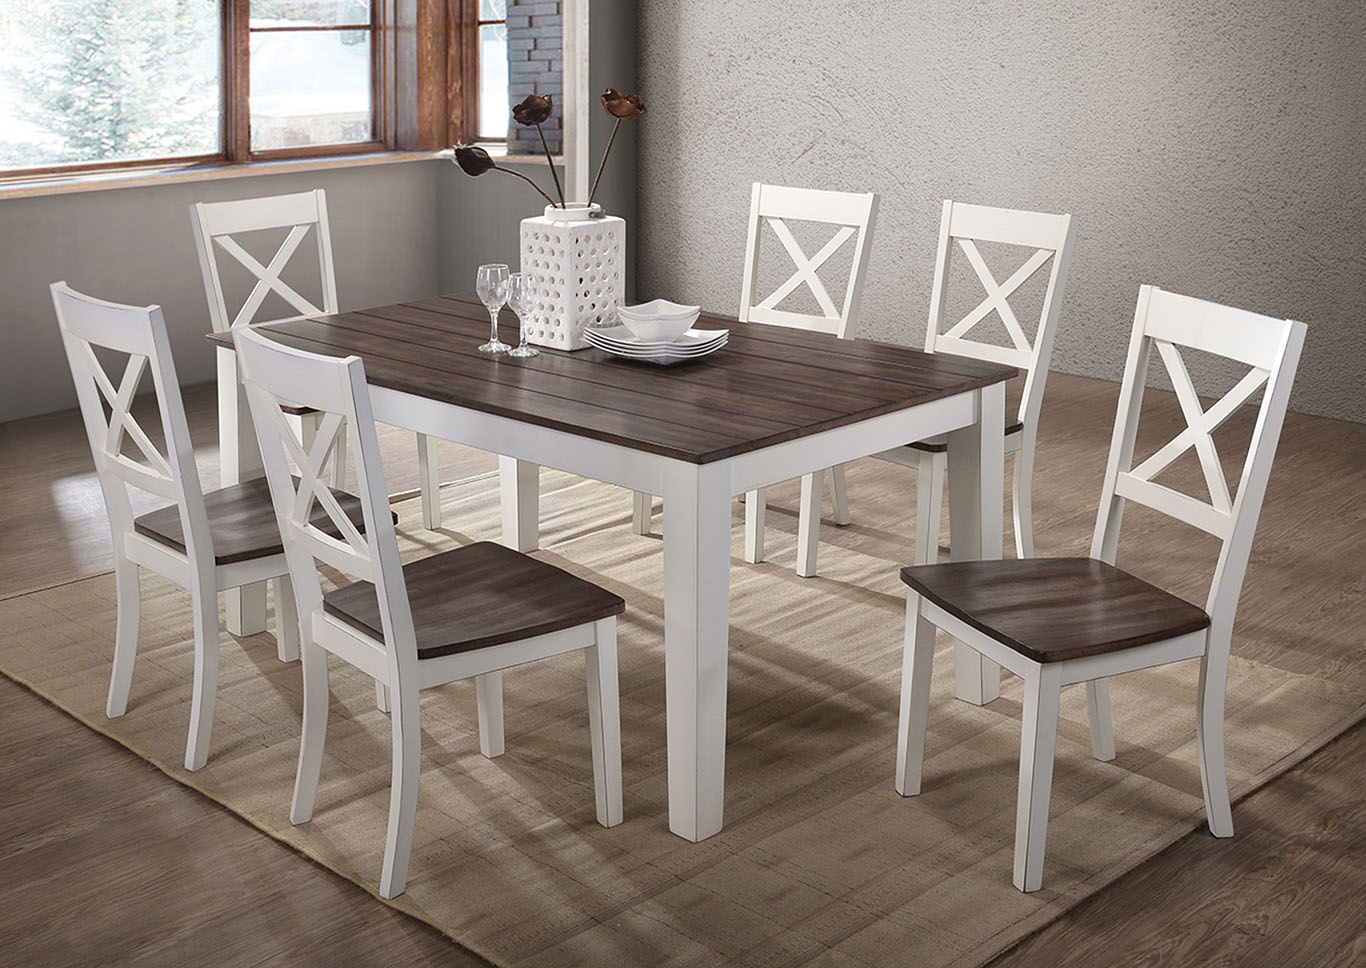 A La Carte White Dining Table w/4 Chairs,United Furniture - Presentation